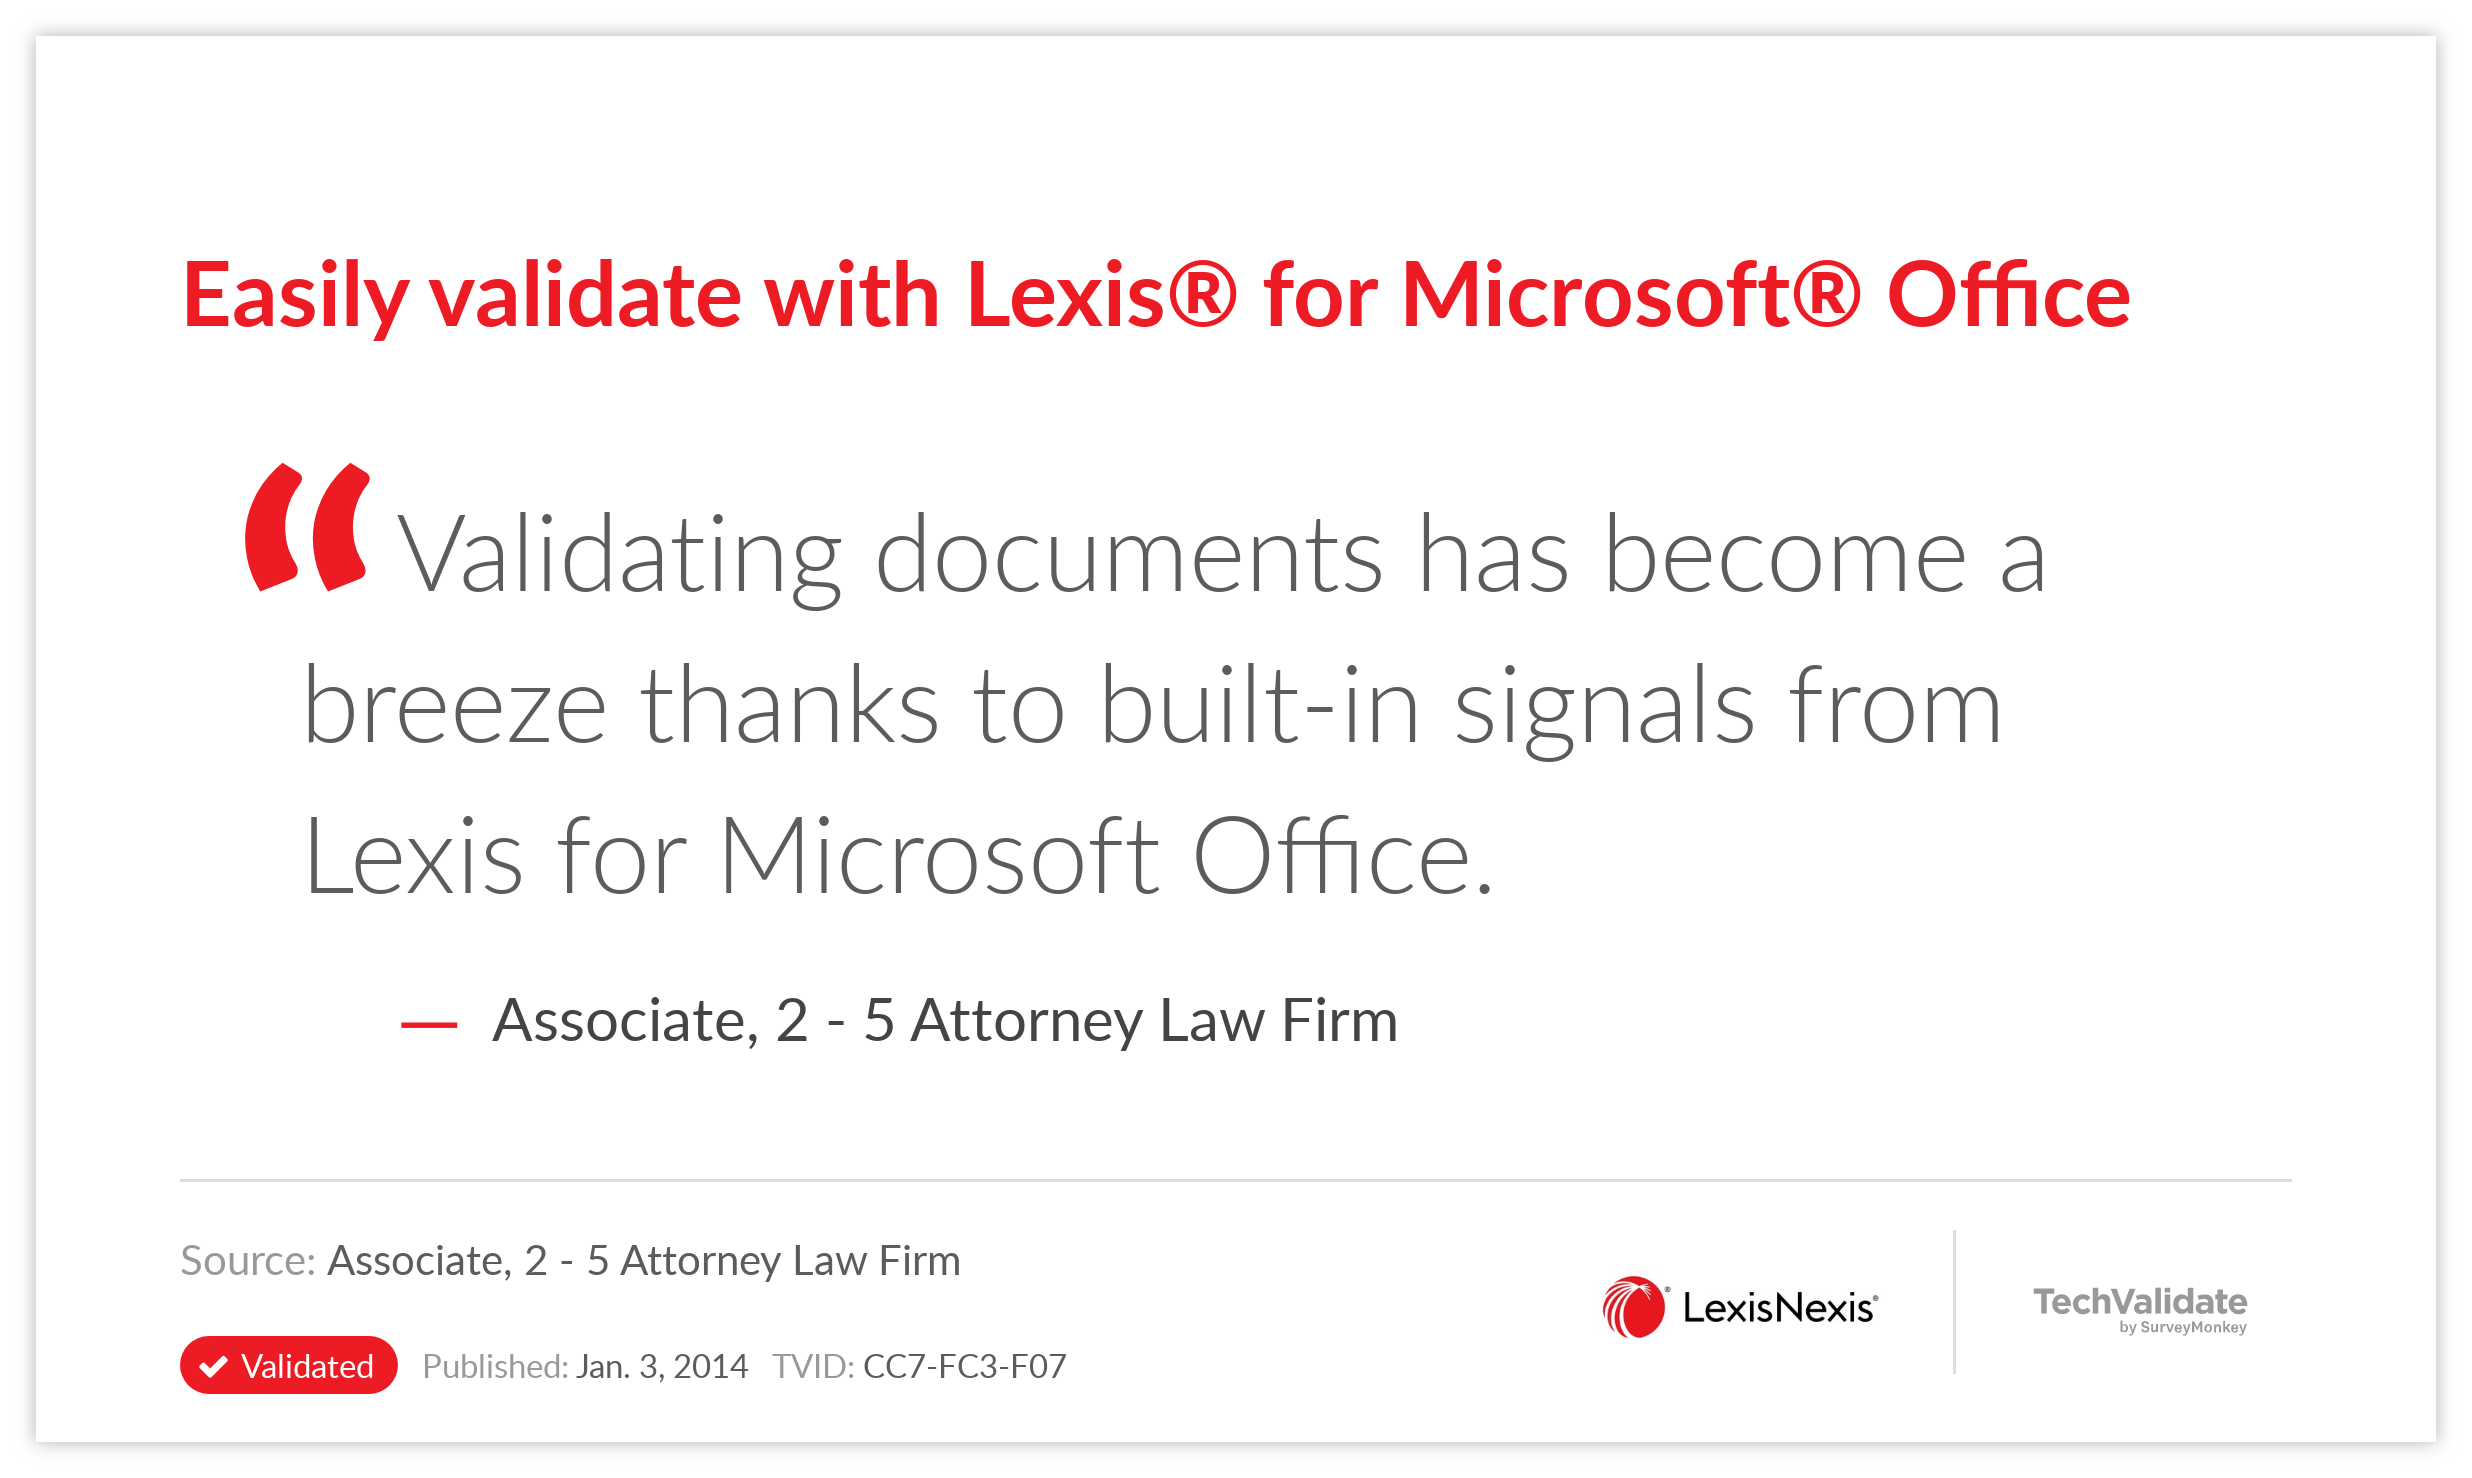 Easily validate with Lexis® for Microsoft® Office